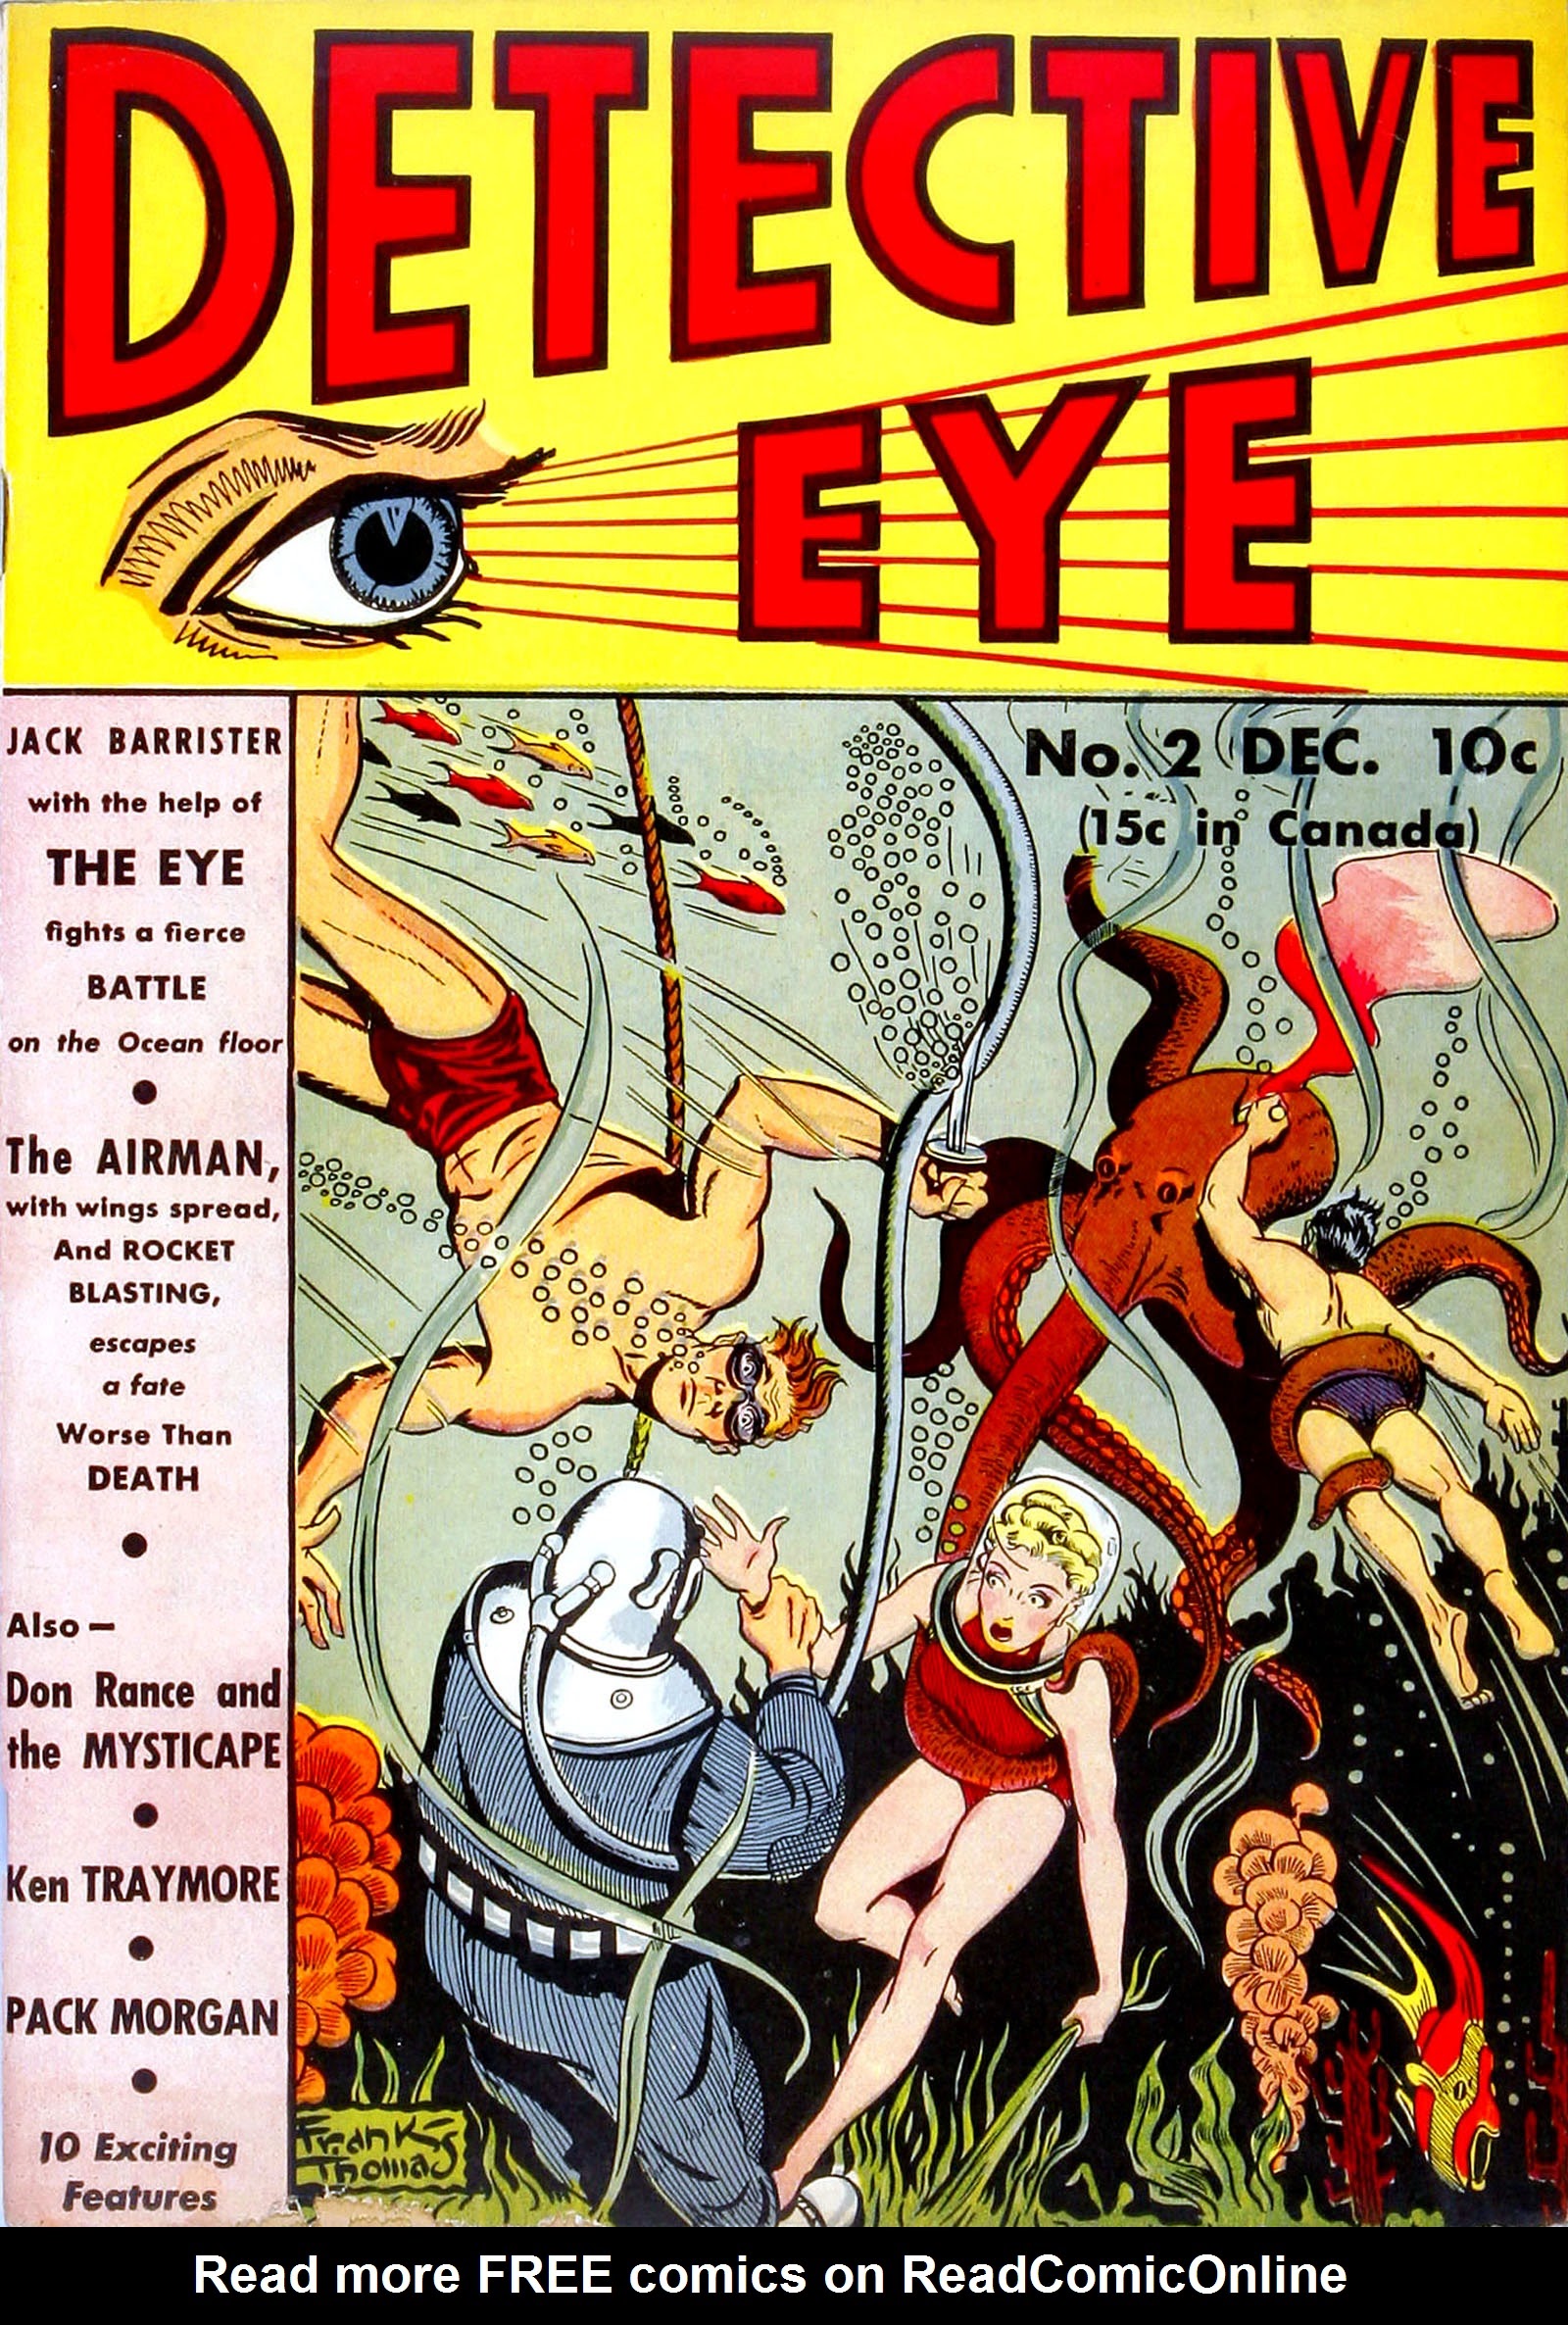 Read online Detective Eye comic -  Issue #2 - 1